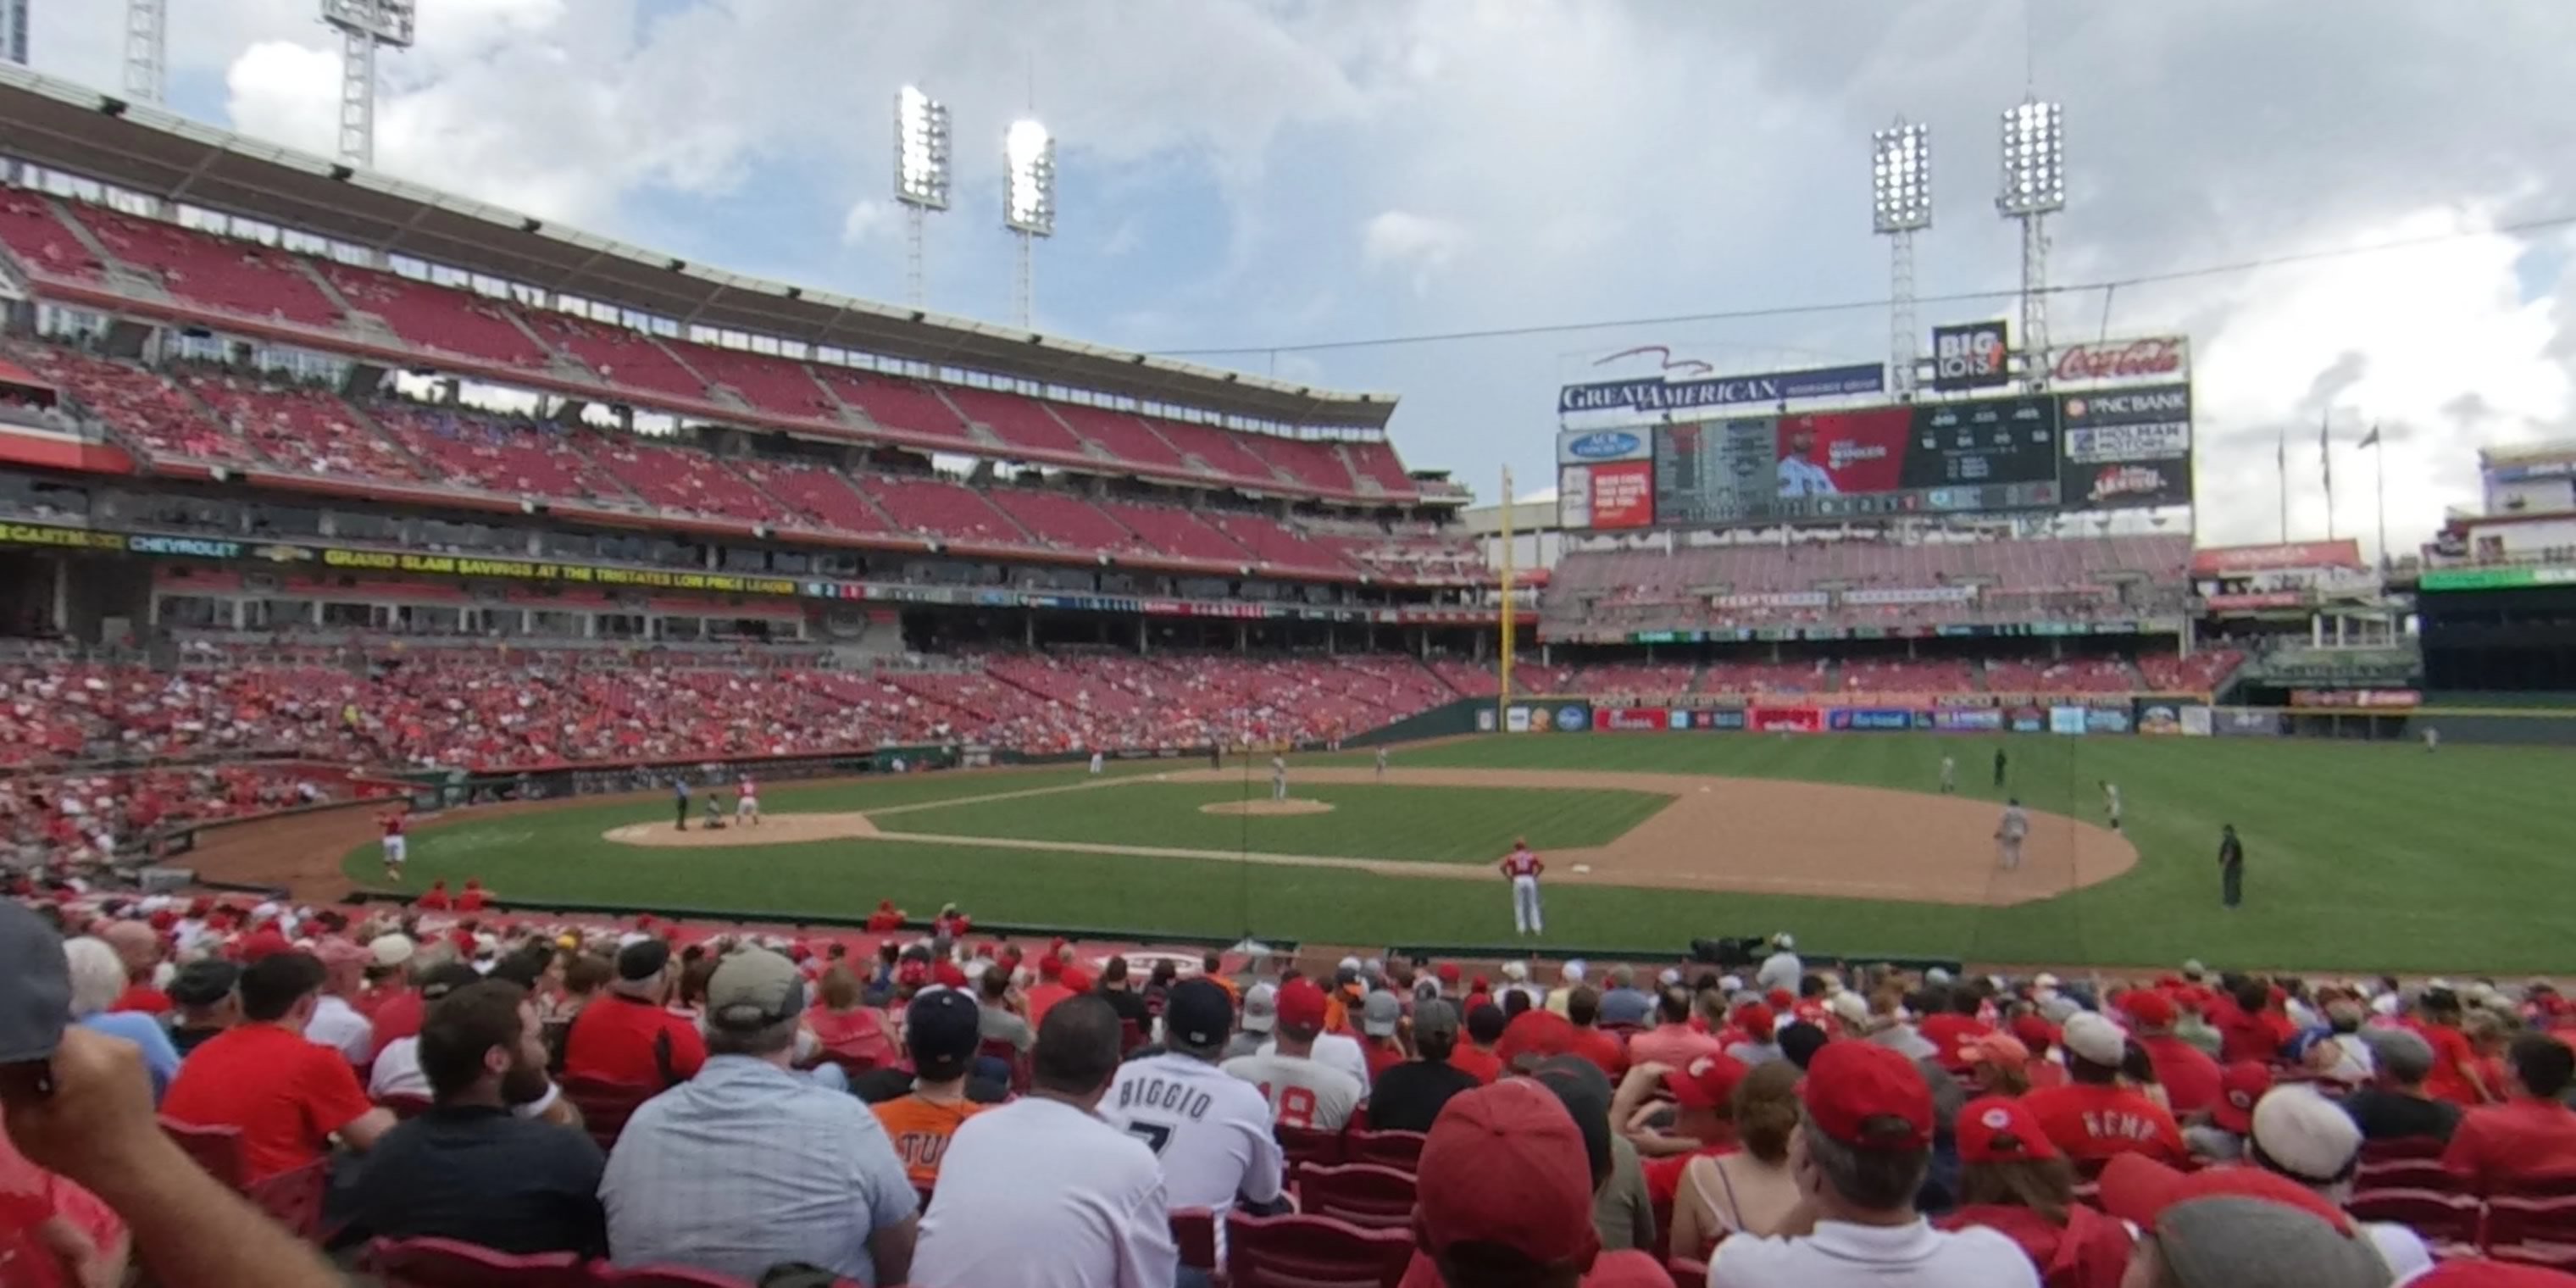 section 130 panoramic seat view  for baseball - great american ball park